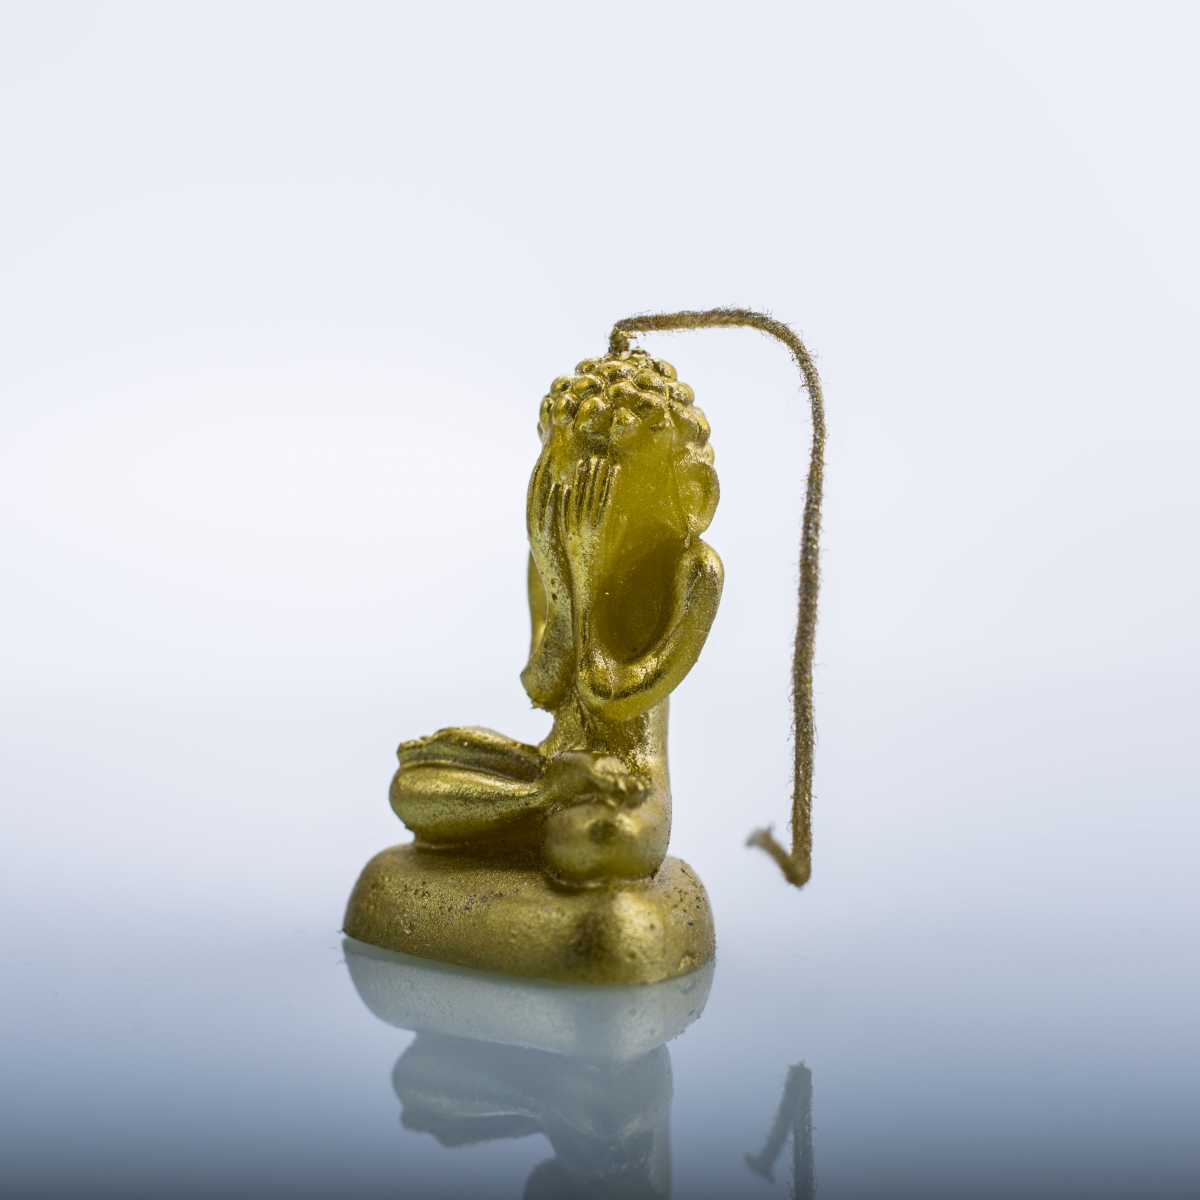 Shaped Candles：Gold Color ,Phra Pidta ,Blindfolded Buddha ,Finely Engraved ,Sculpture Beeswax ,China Factory ,Wholesale Price-HOWCANDLE-Candles,Scented Candles,Aromatherapy Candles,Soy Candles,Vegan Candles,Jar Candles,Pillar Candles,Candle Gift Sets,Essential Oils,Reed Diffuser,Candle Holder,